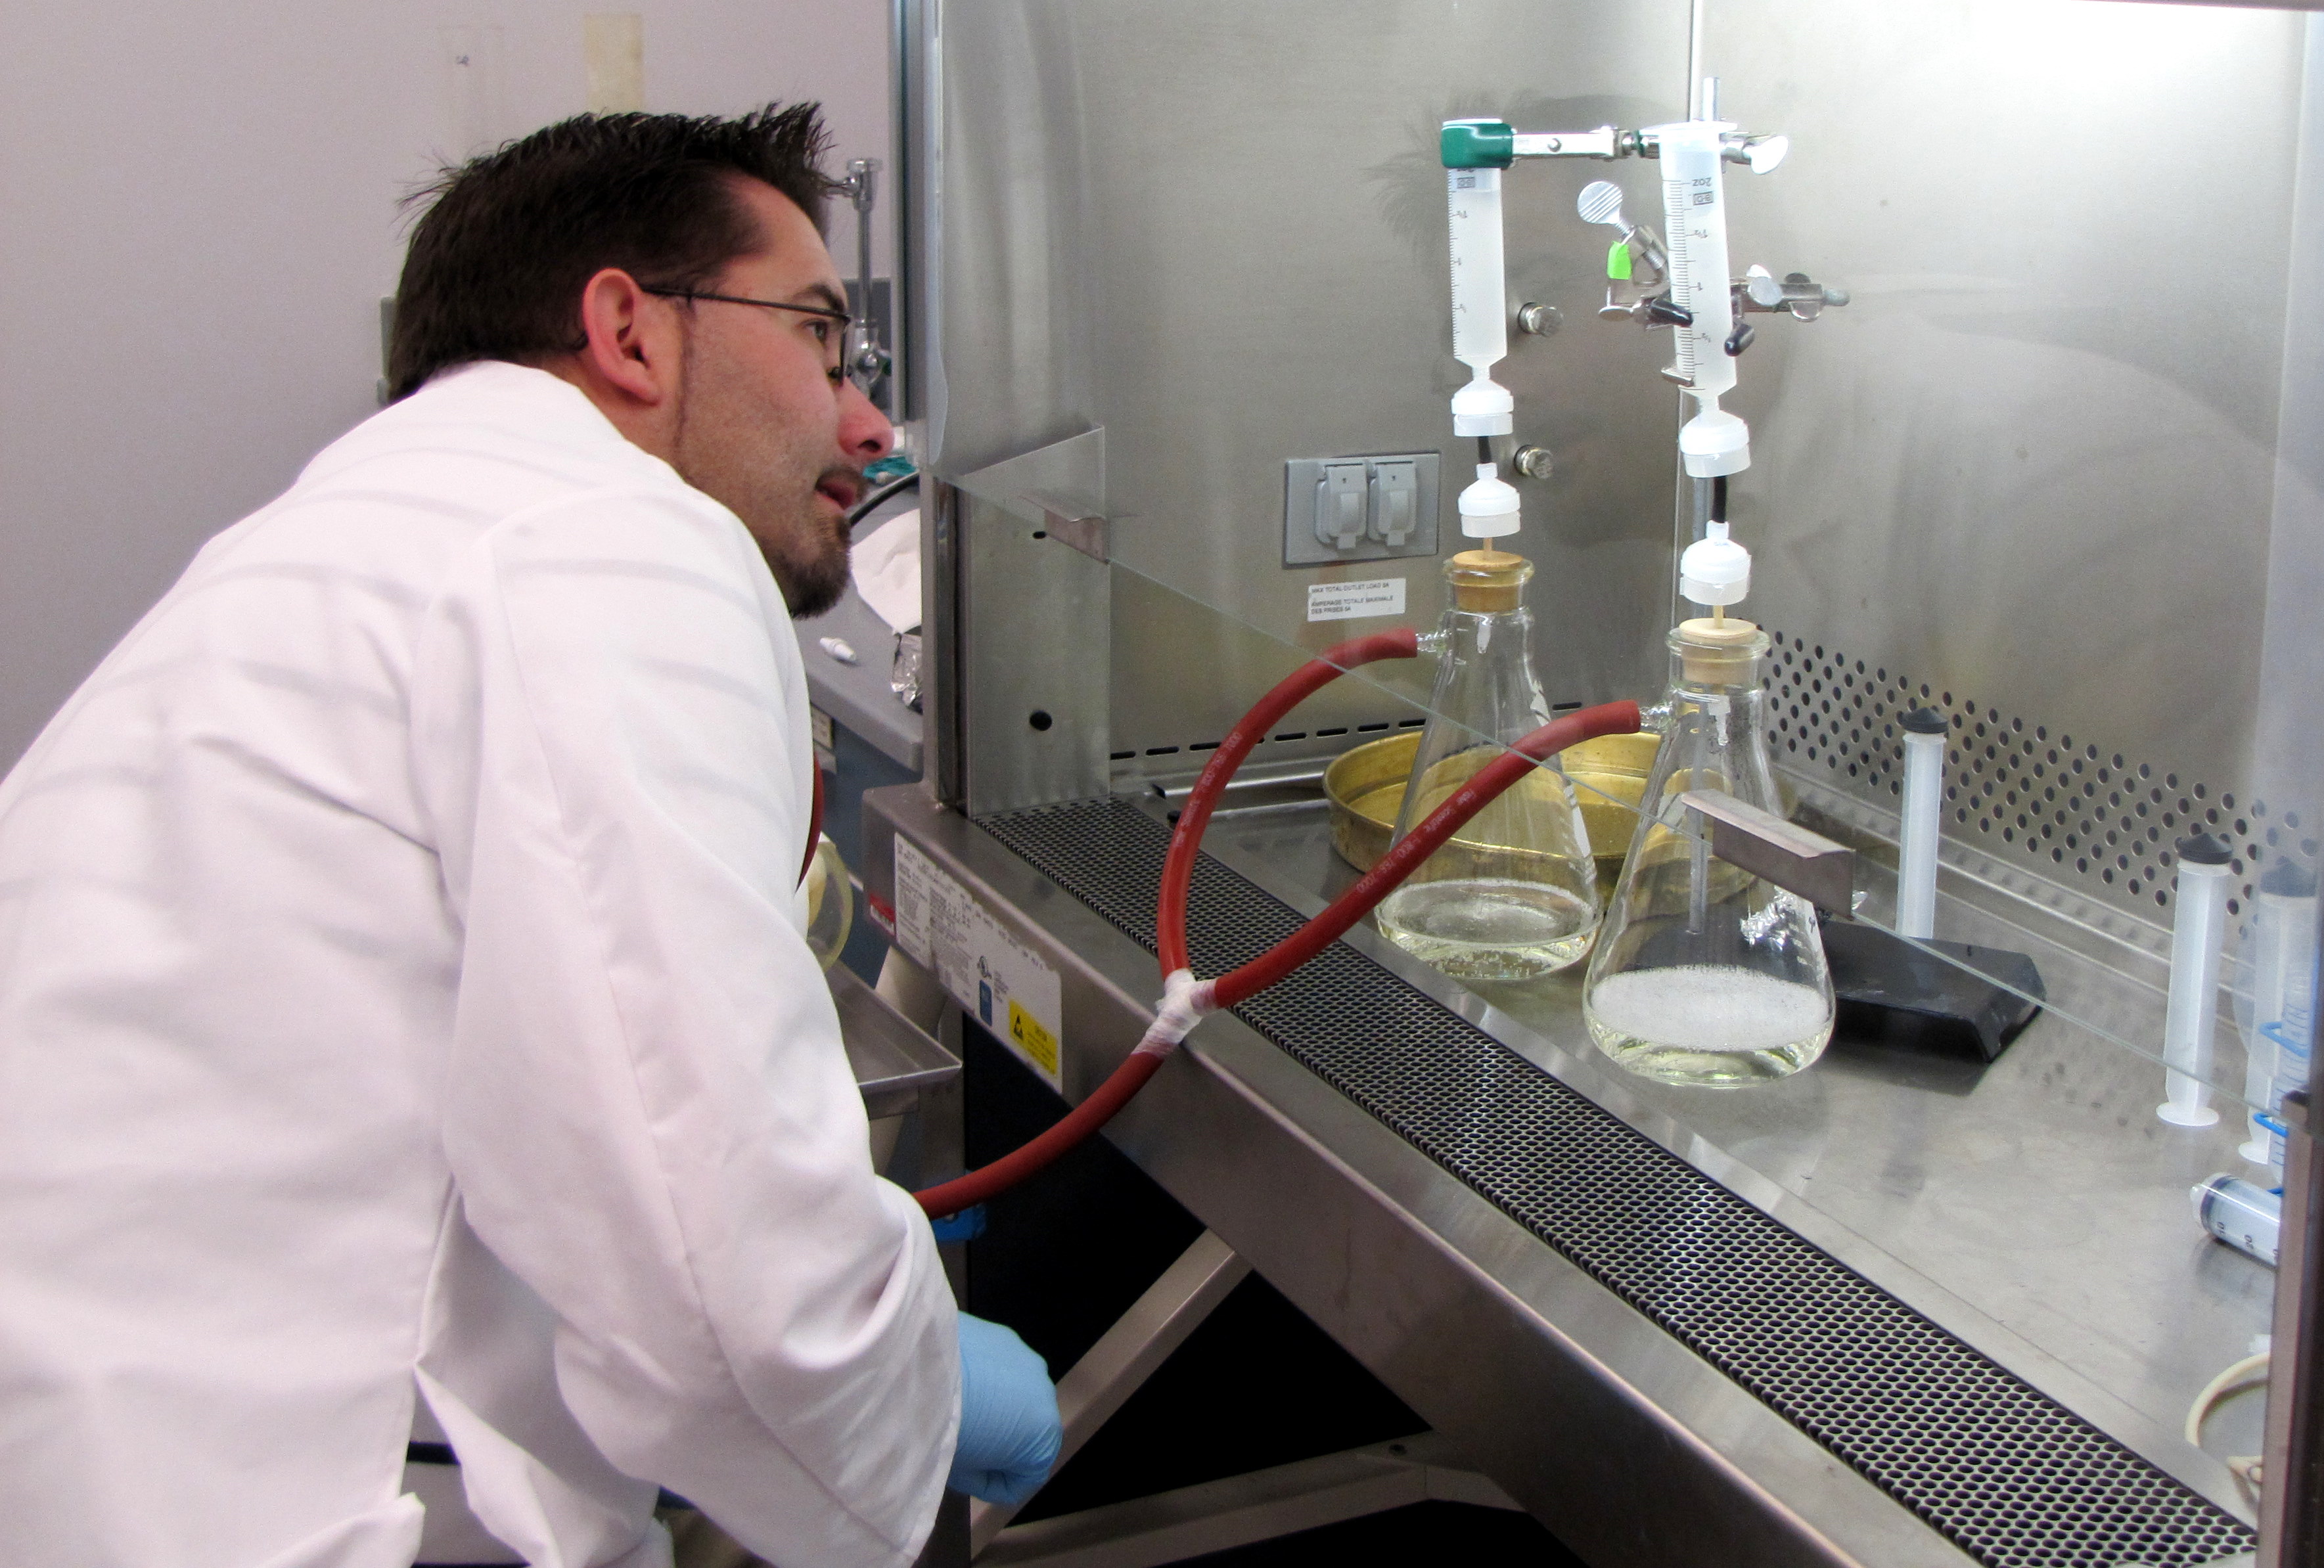 Doug Fadrosh checks on our de-aggregation and filtration set up. After the microorganisms are dissociated from the particulate matter and each other, they are filtered through 3.0 and 0.1 micron filters, and the balance - the viral fraction - is collected in the flask.